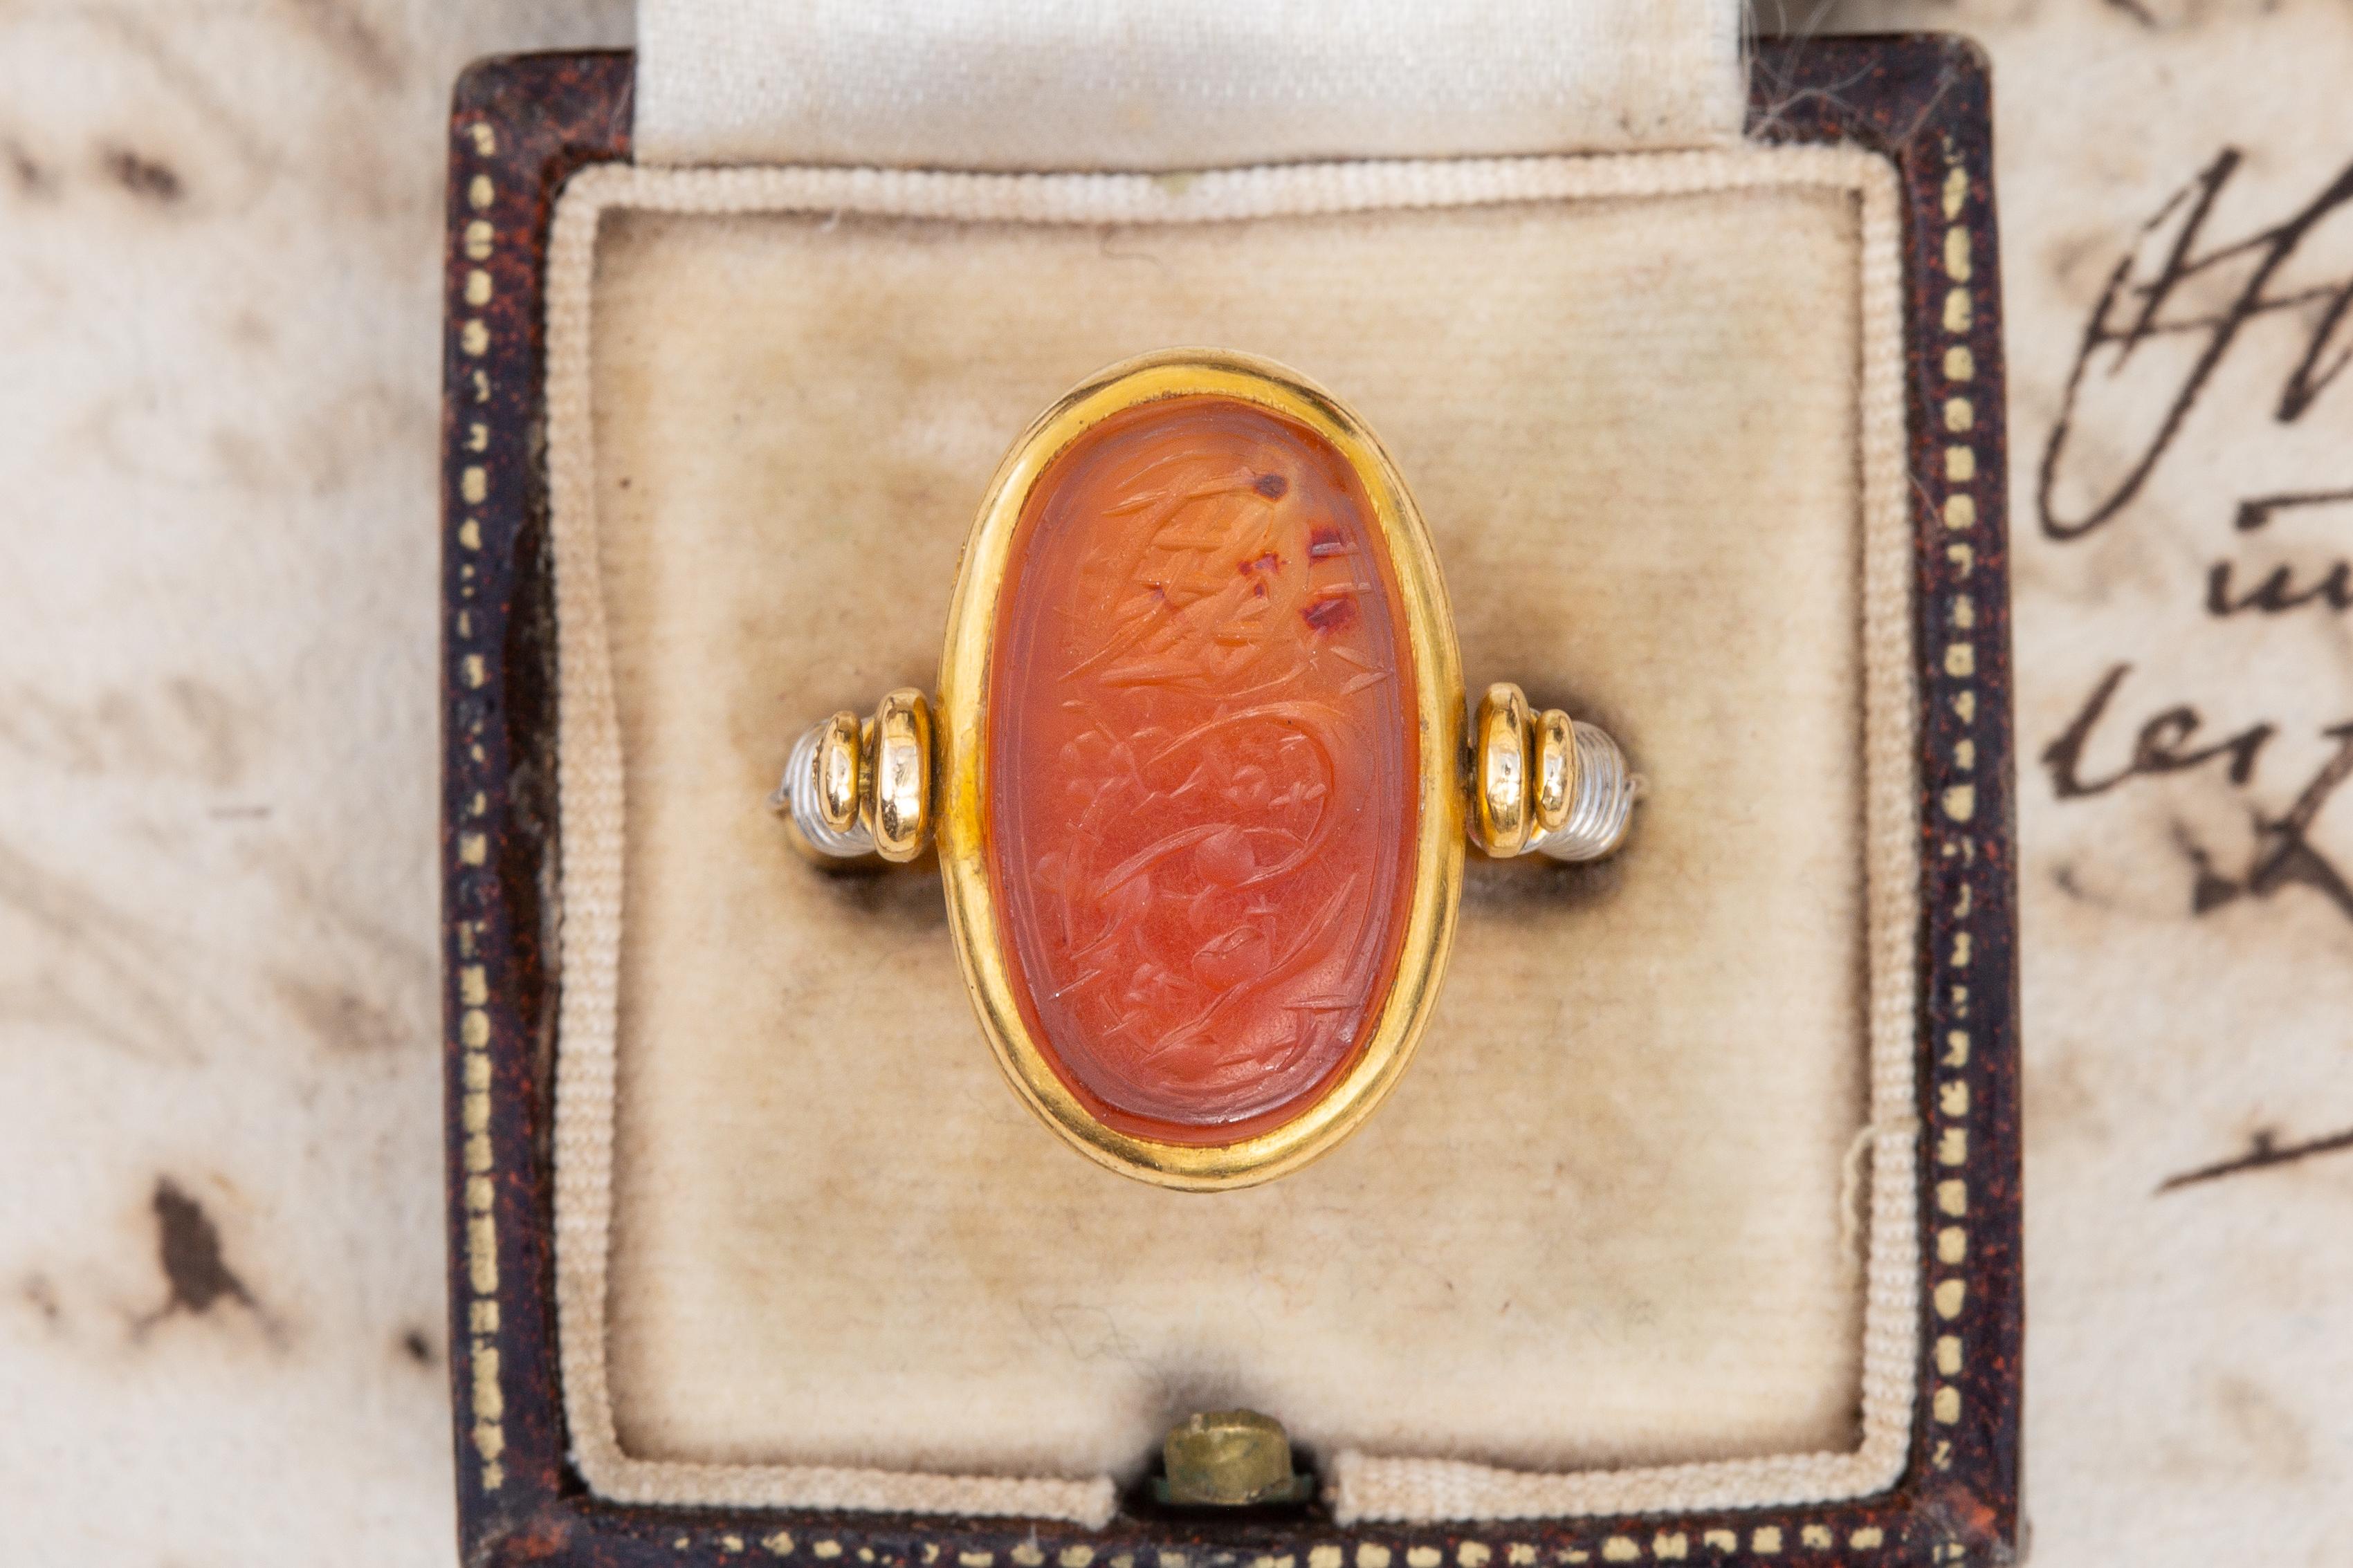 Egyptian Revival Antique French Gold Swivel Ring with Islamic Orange Agate Calligraphic Intaglio